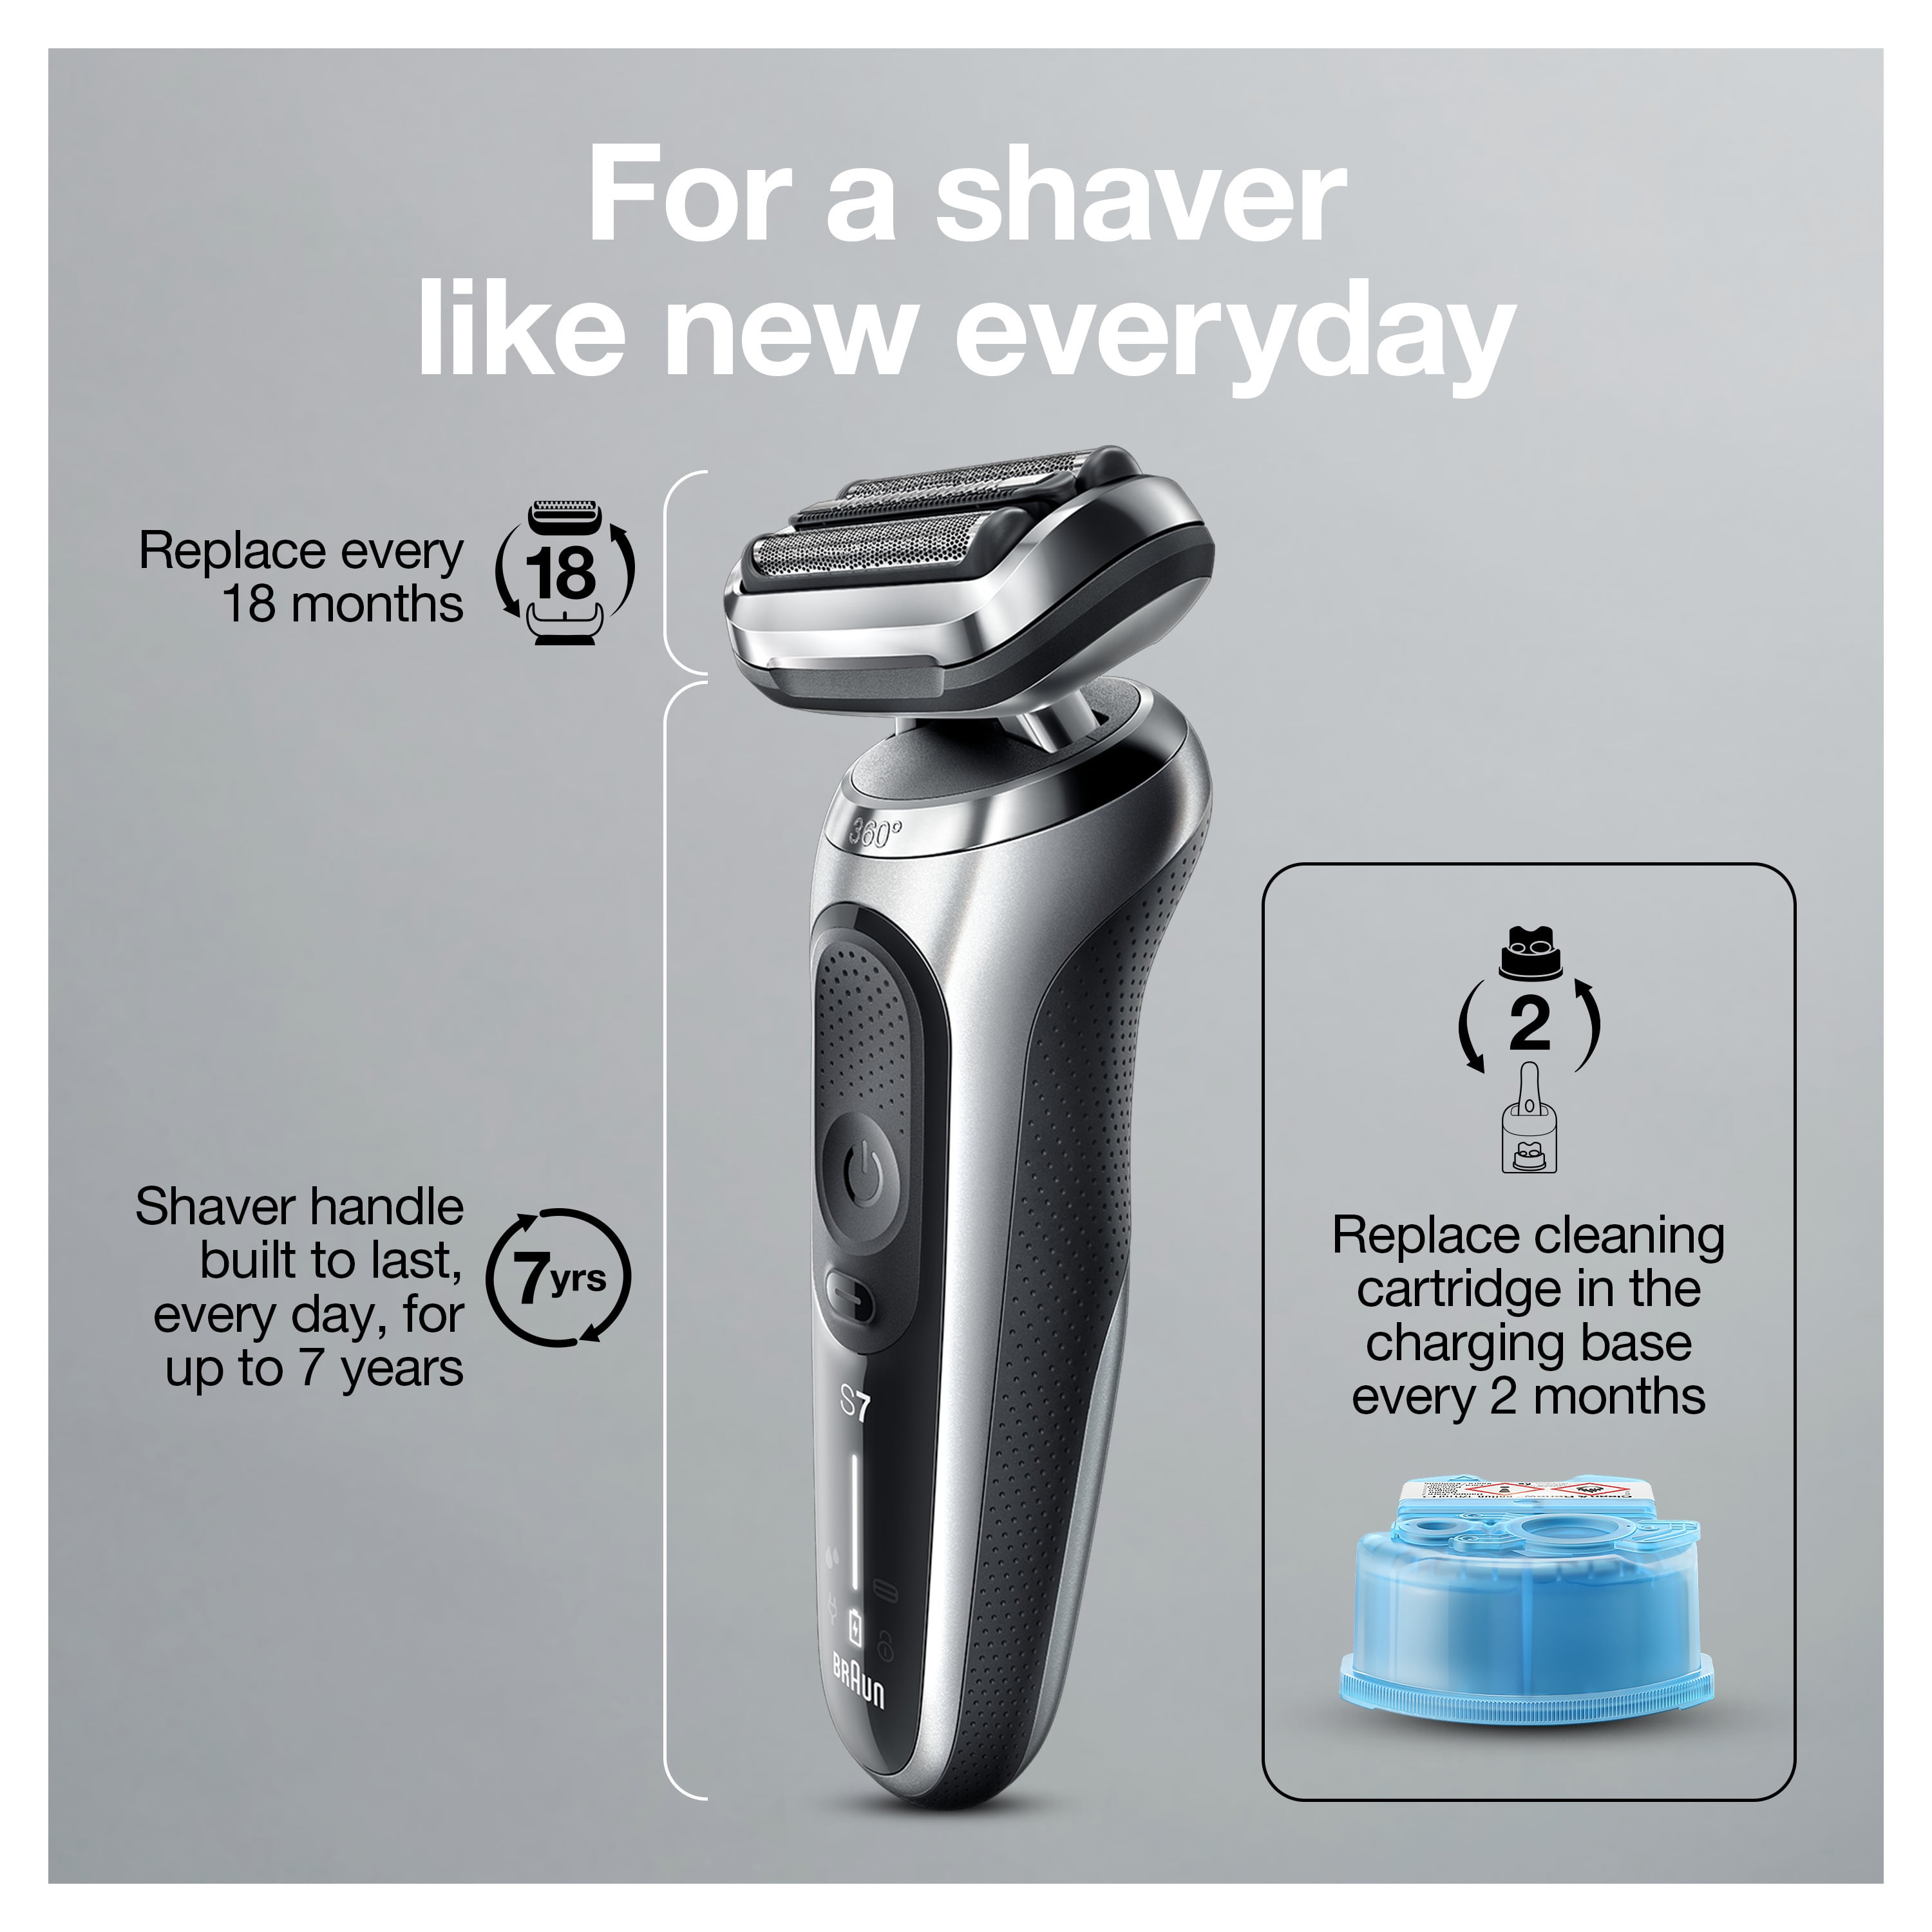 Series 7 71-S7500cc Wet & Dry shaver with SmartCare center and 1